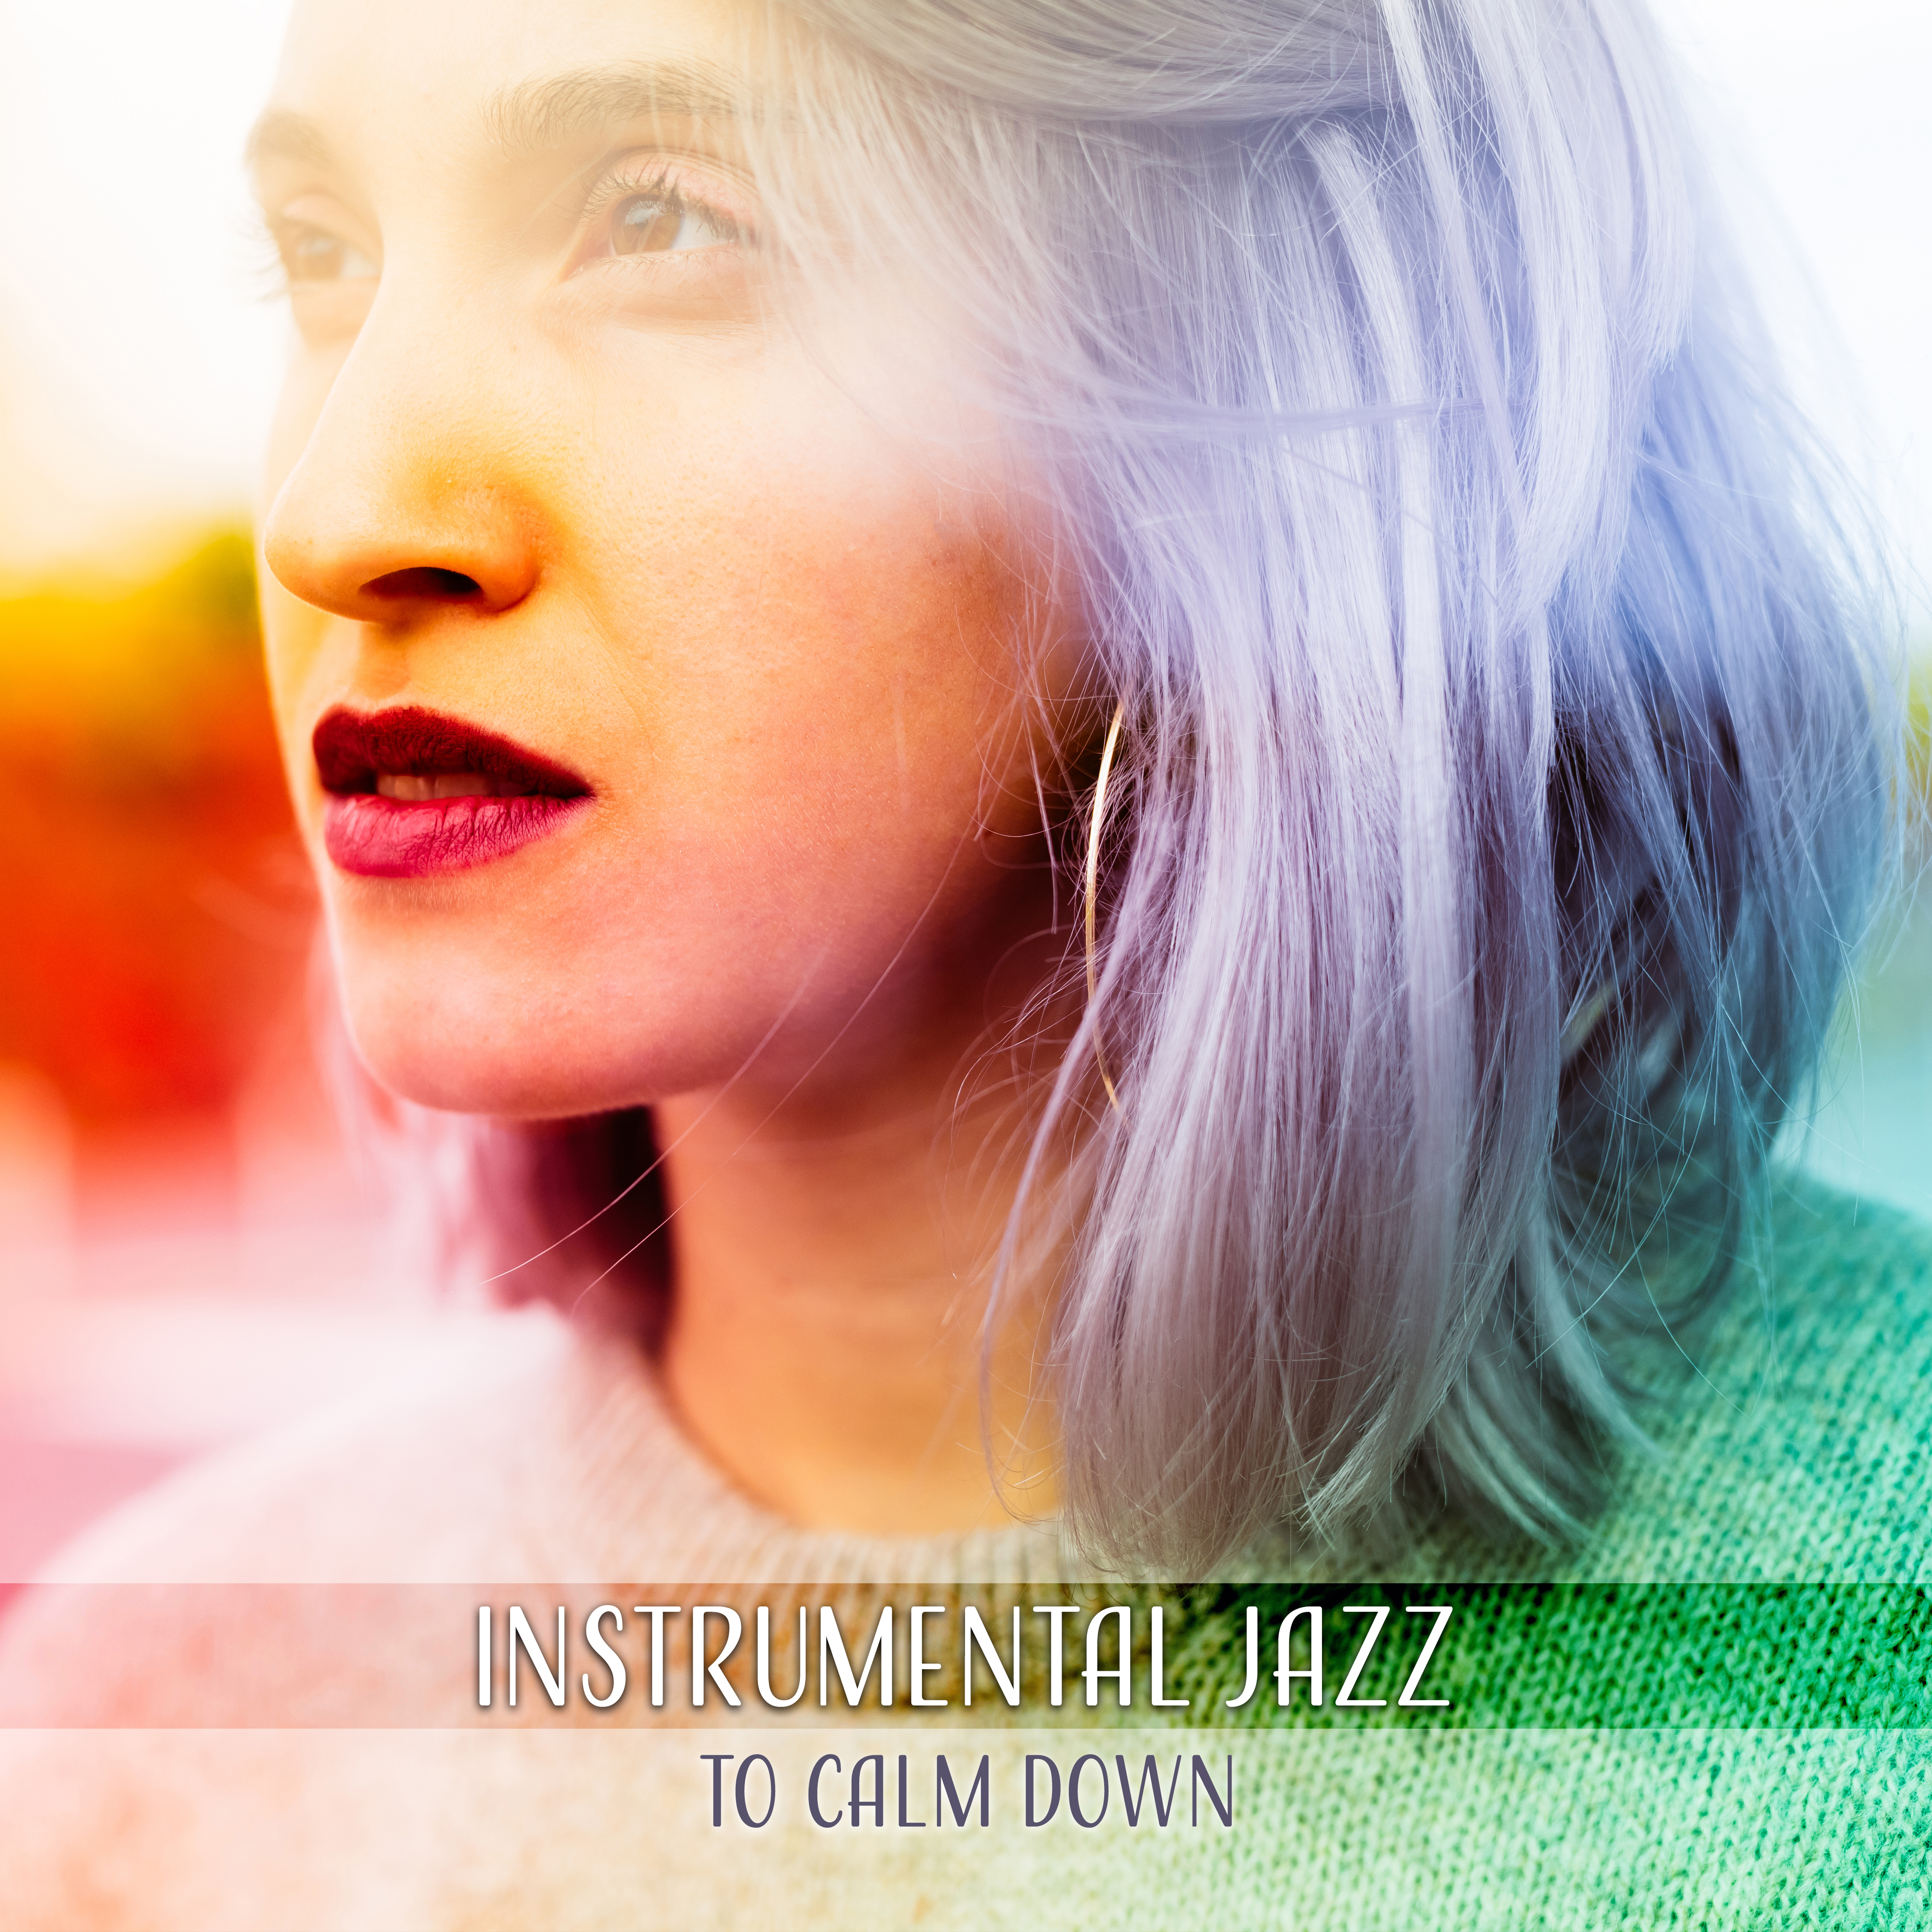 Instrumental Jazz to Calm Down  Soft Sounds of Jazz, Peaceful Music, Smooth Piano Melodies, Rest with Jazz